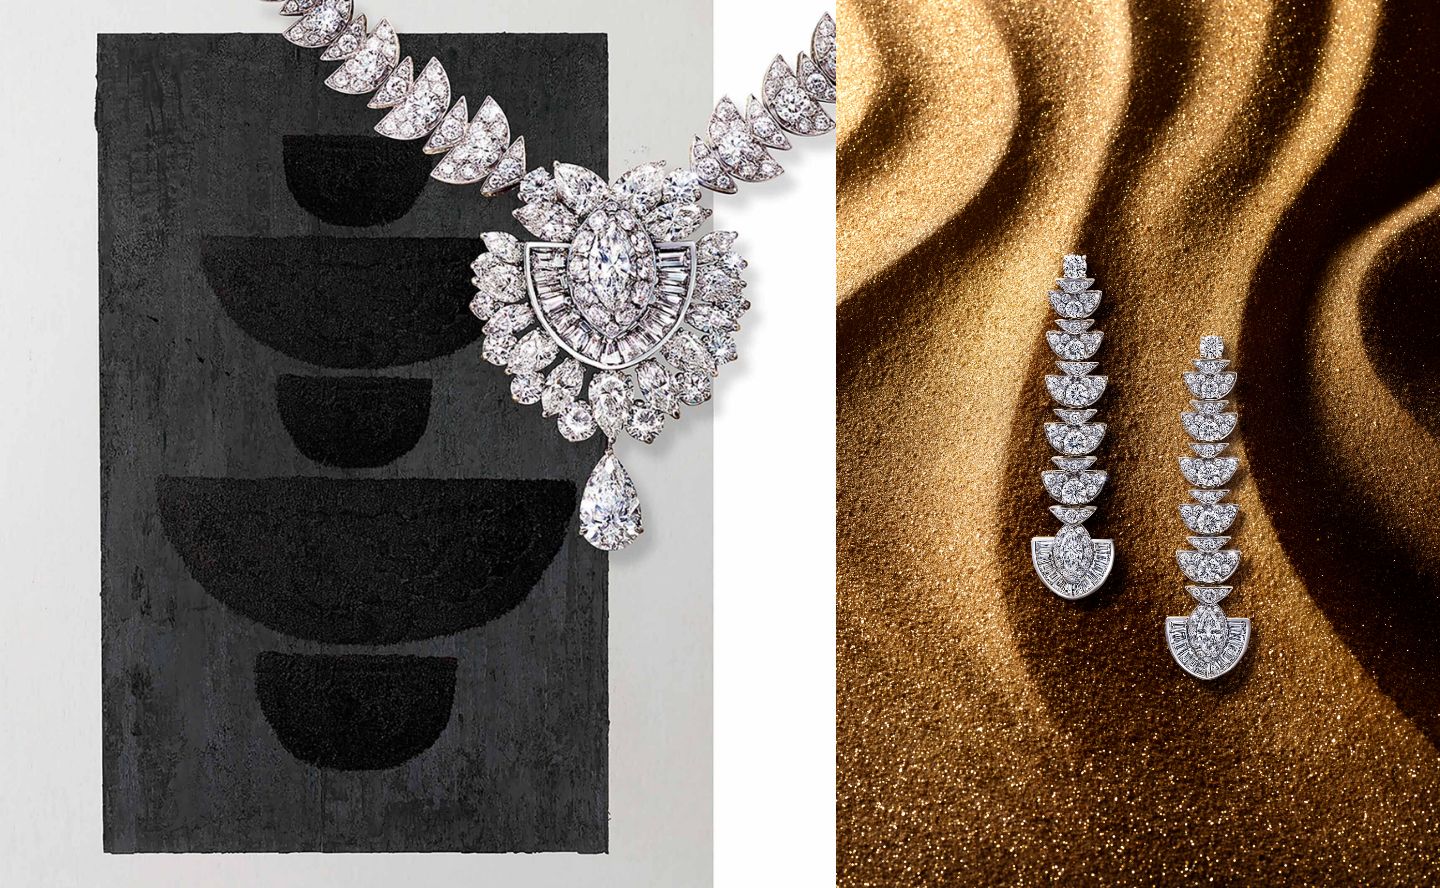 Graff Night Moon white diamond earrings, bracelet and necklace from the Tribal jewellery collection and a pear shape diamond ring, in a desert